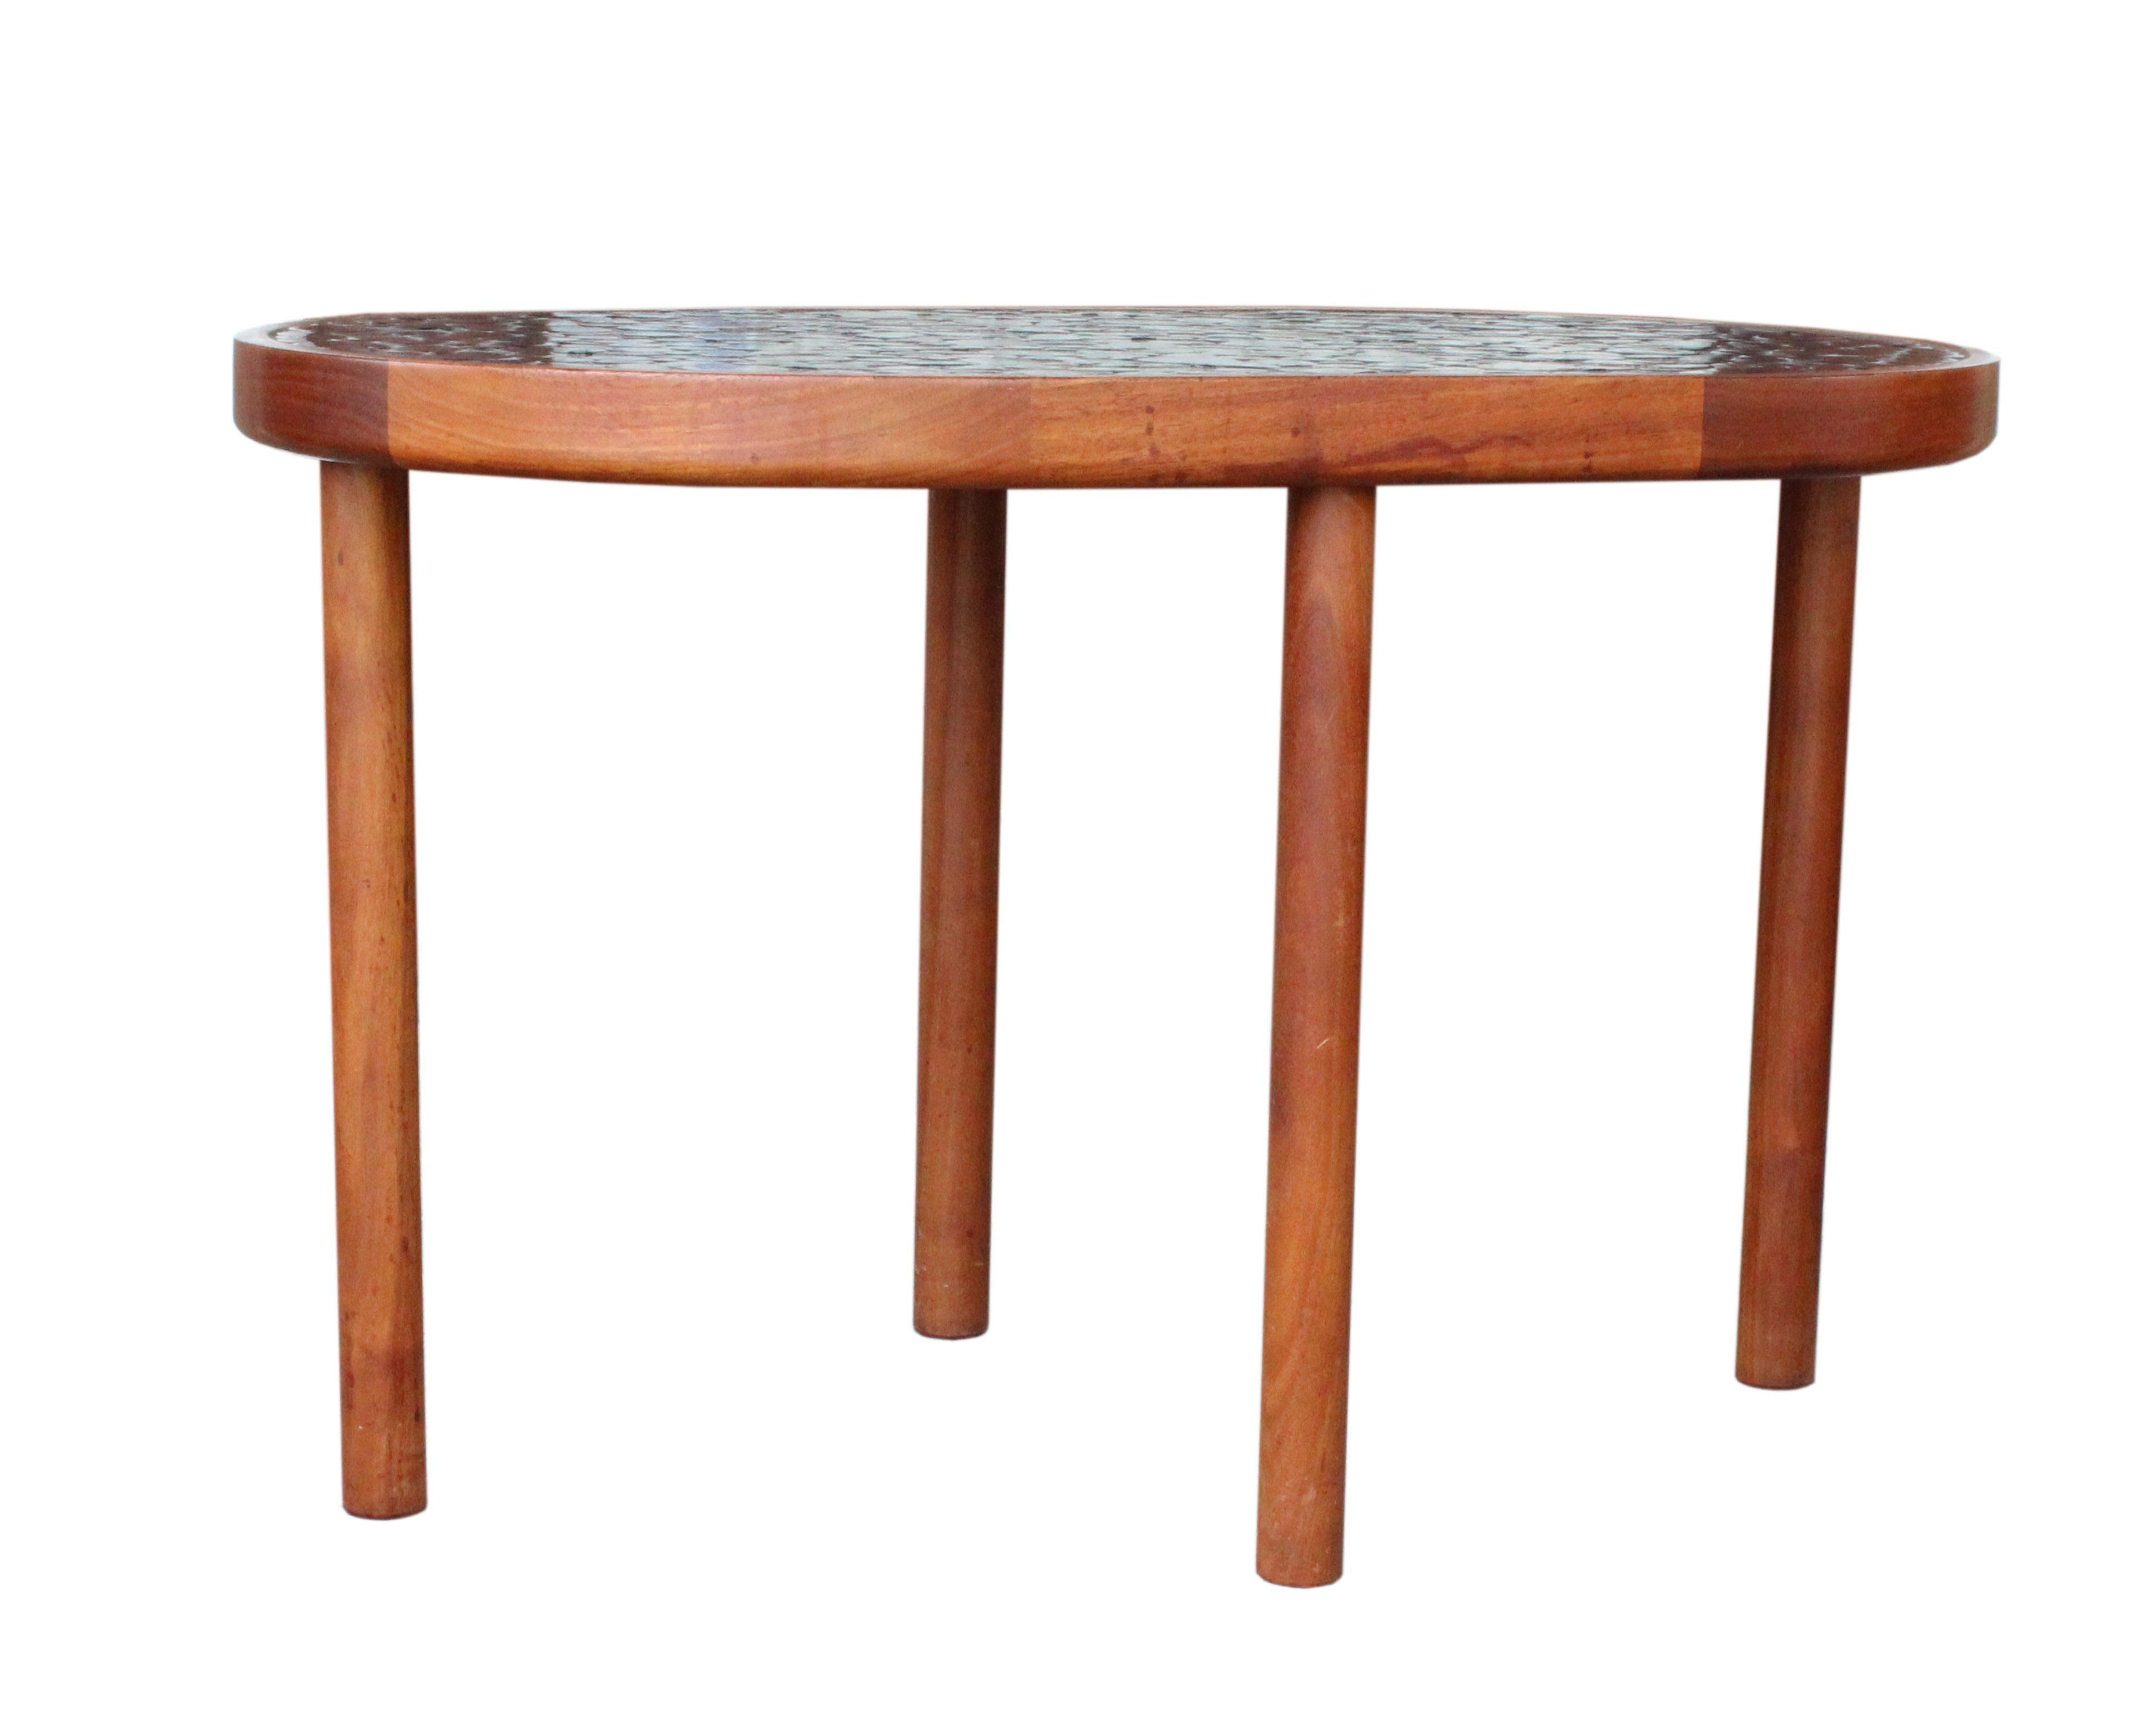 American Martz Marshall Studios Mid-Century Modern Walnut and Round Tile Top Table For Sale